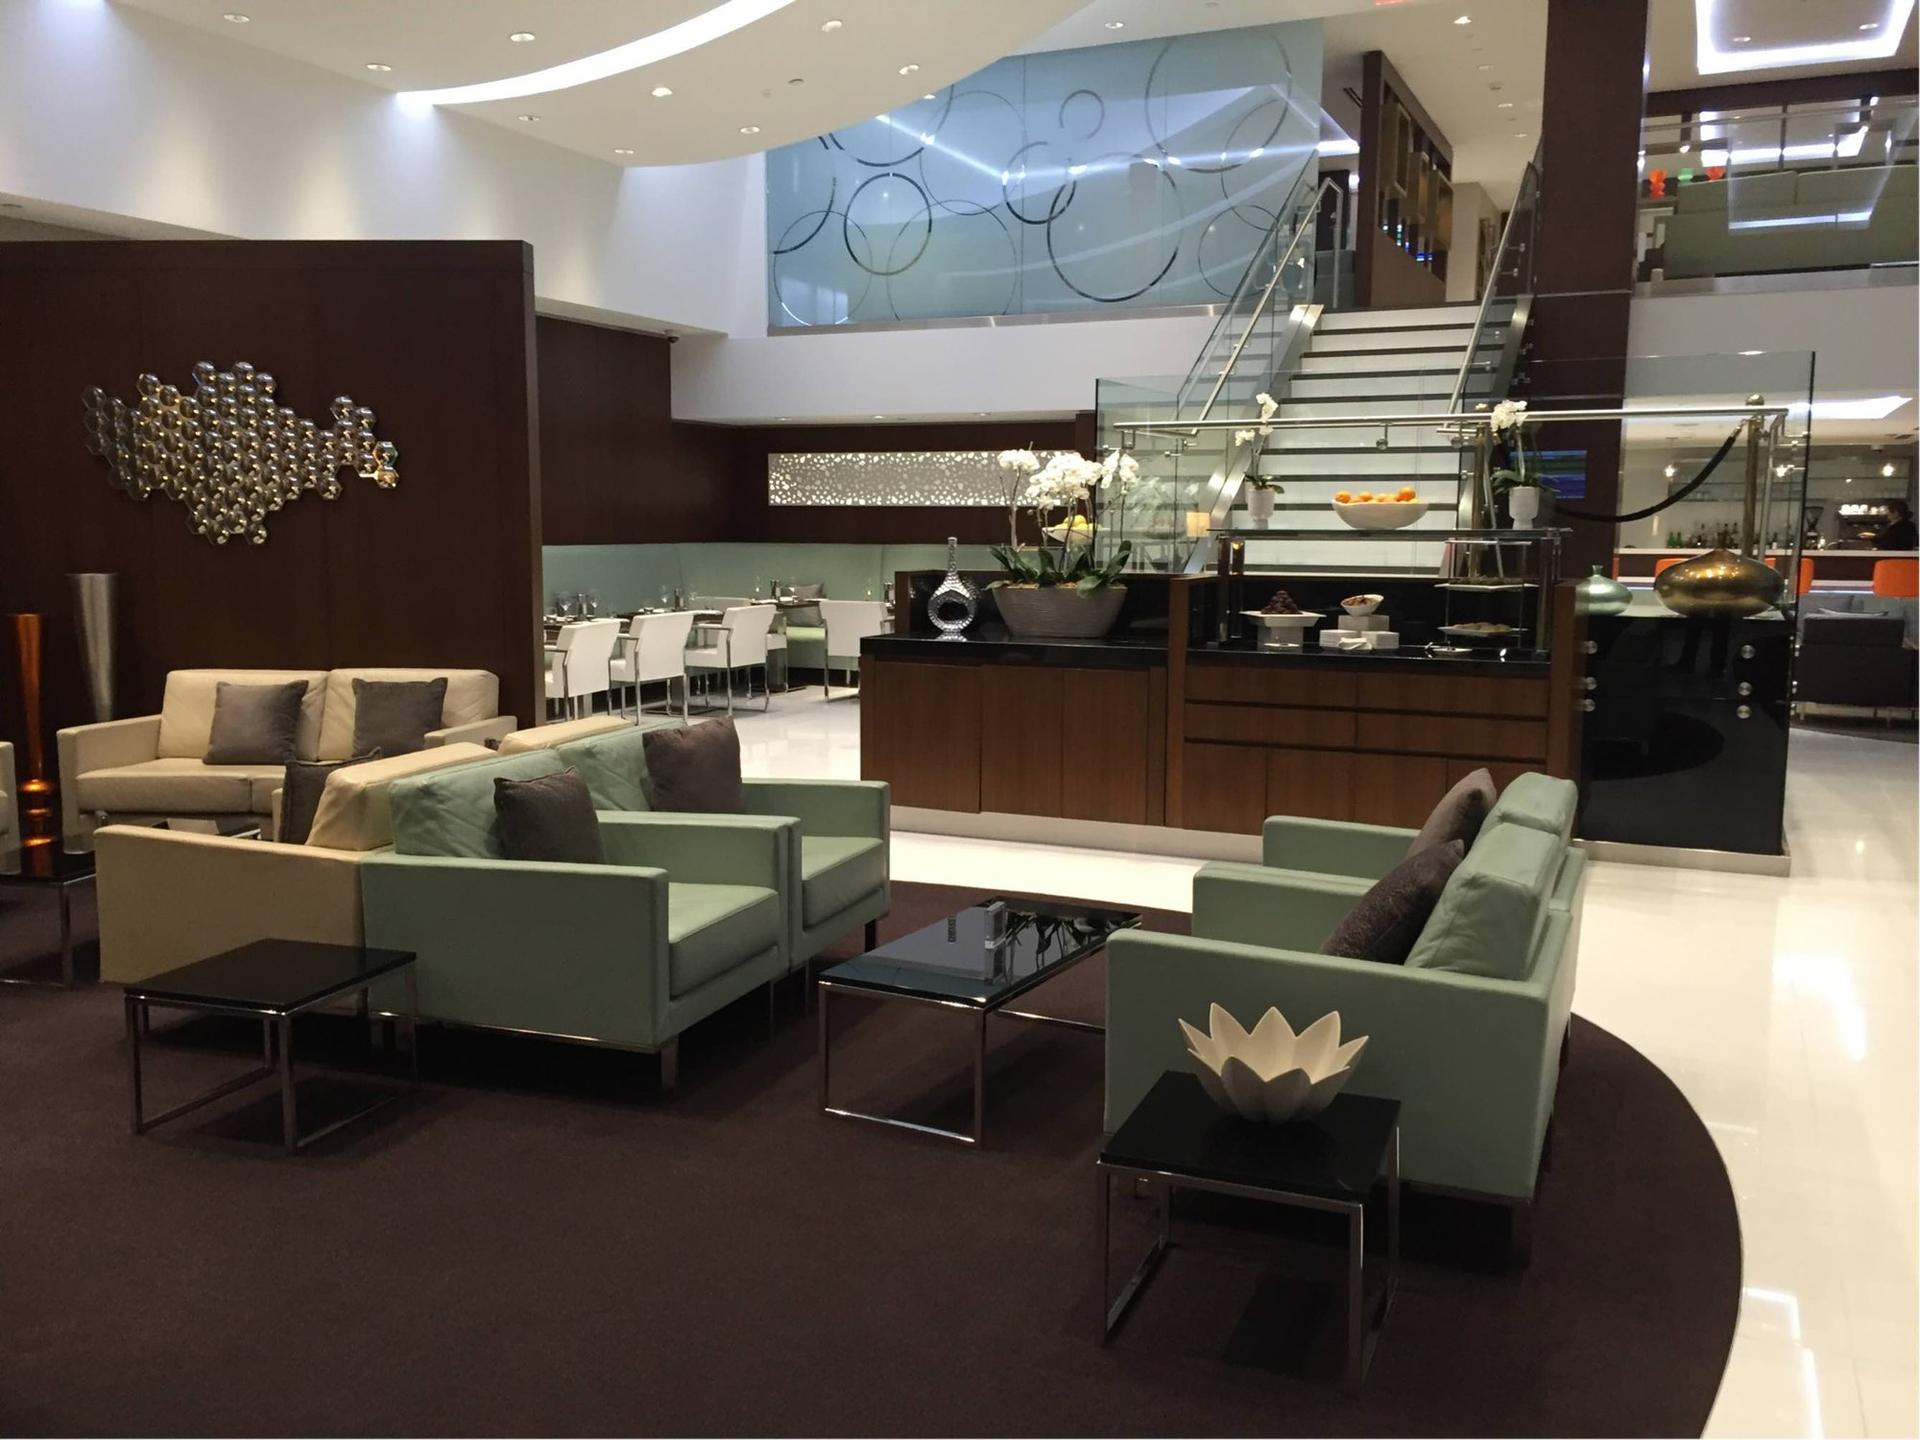 Etihad Airways First & Business Class Lounge image 4 of 17